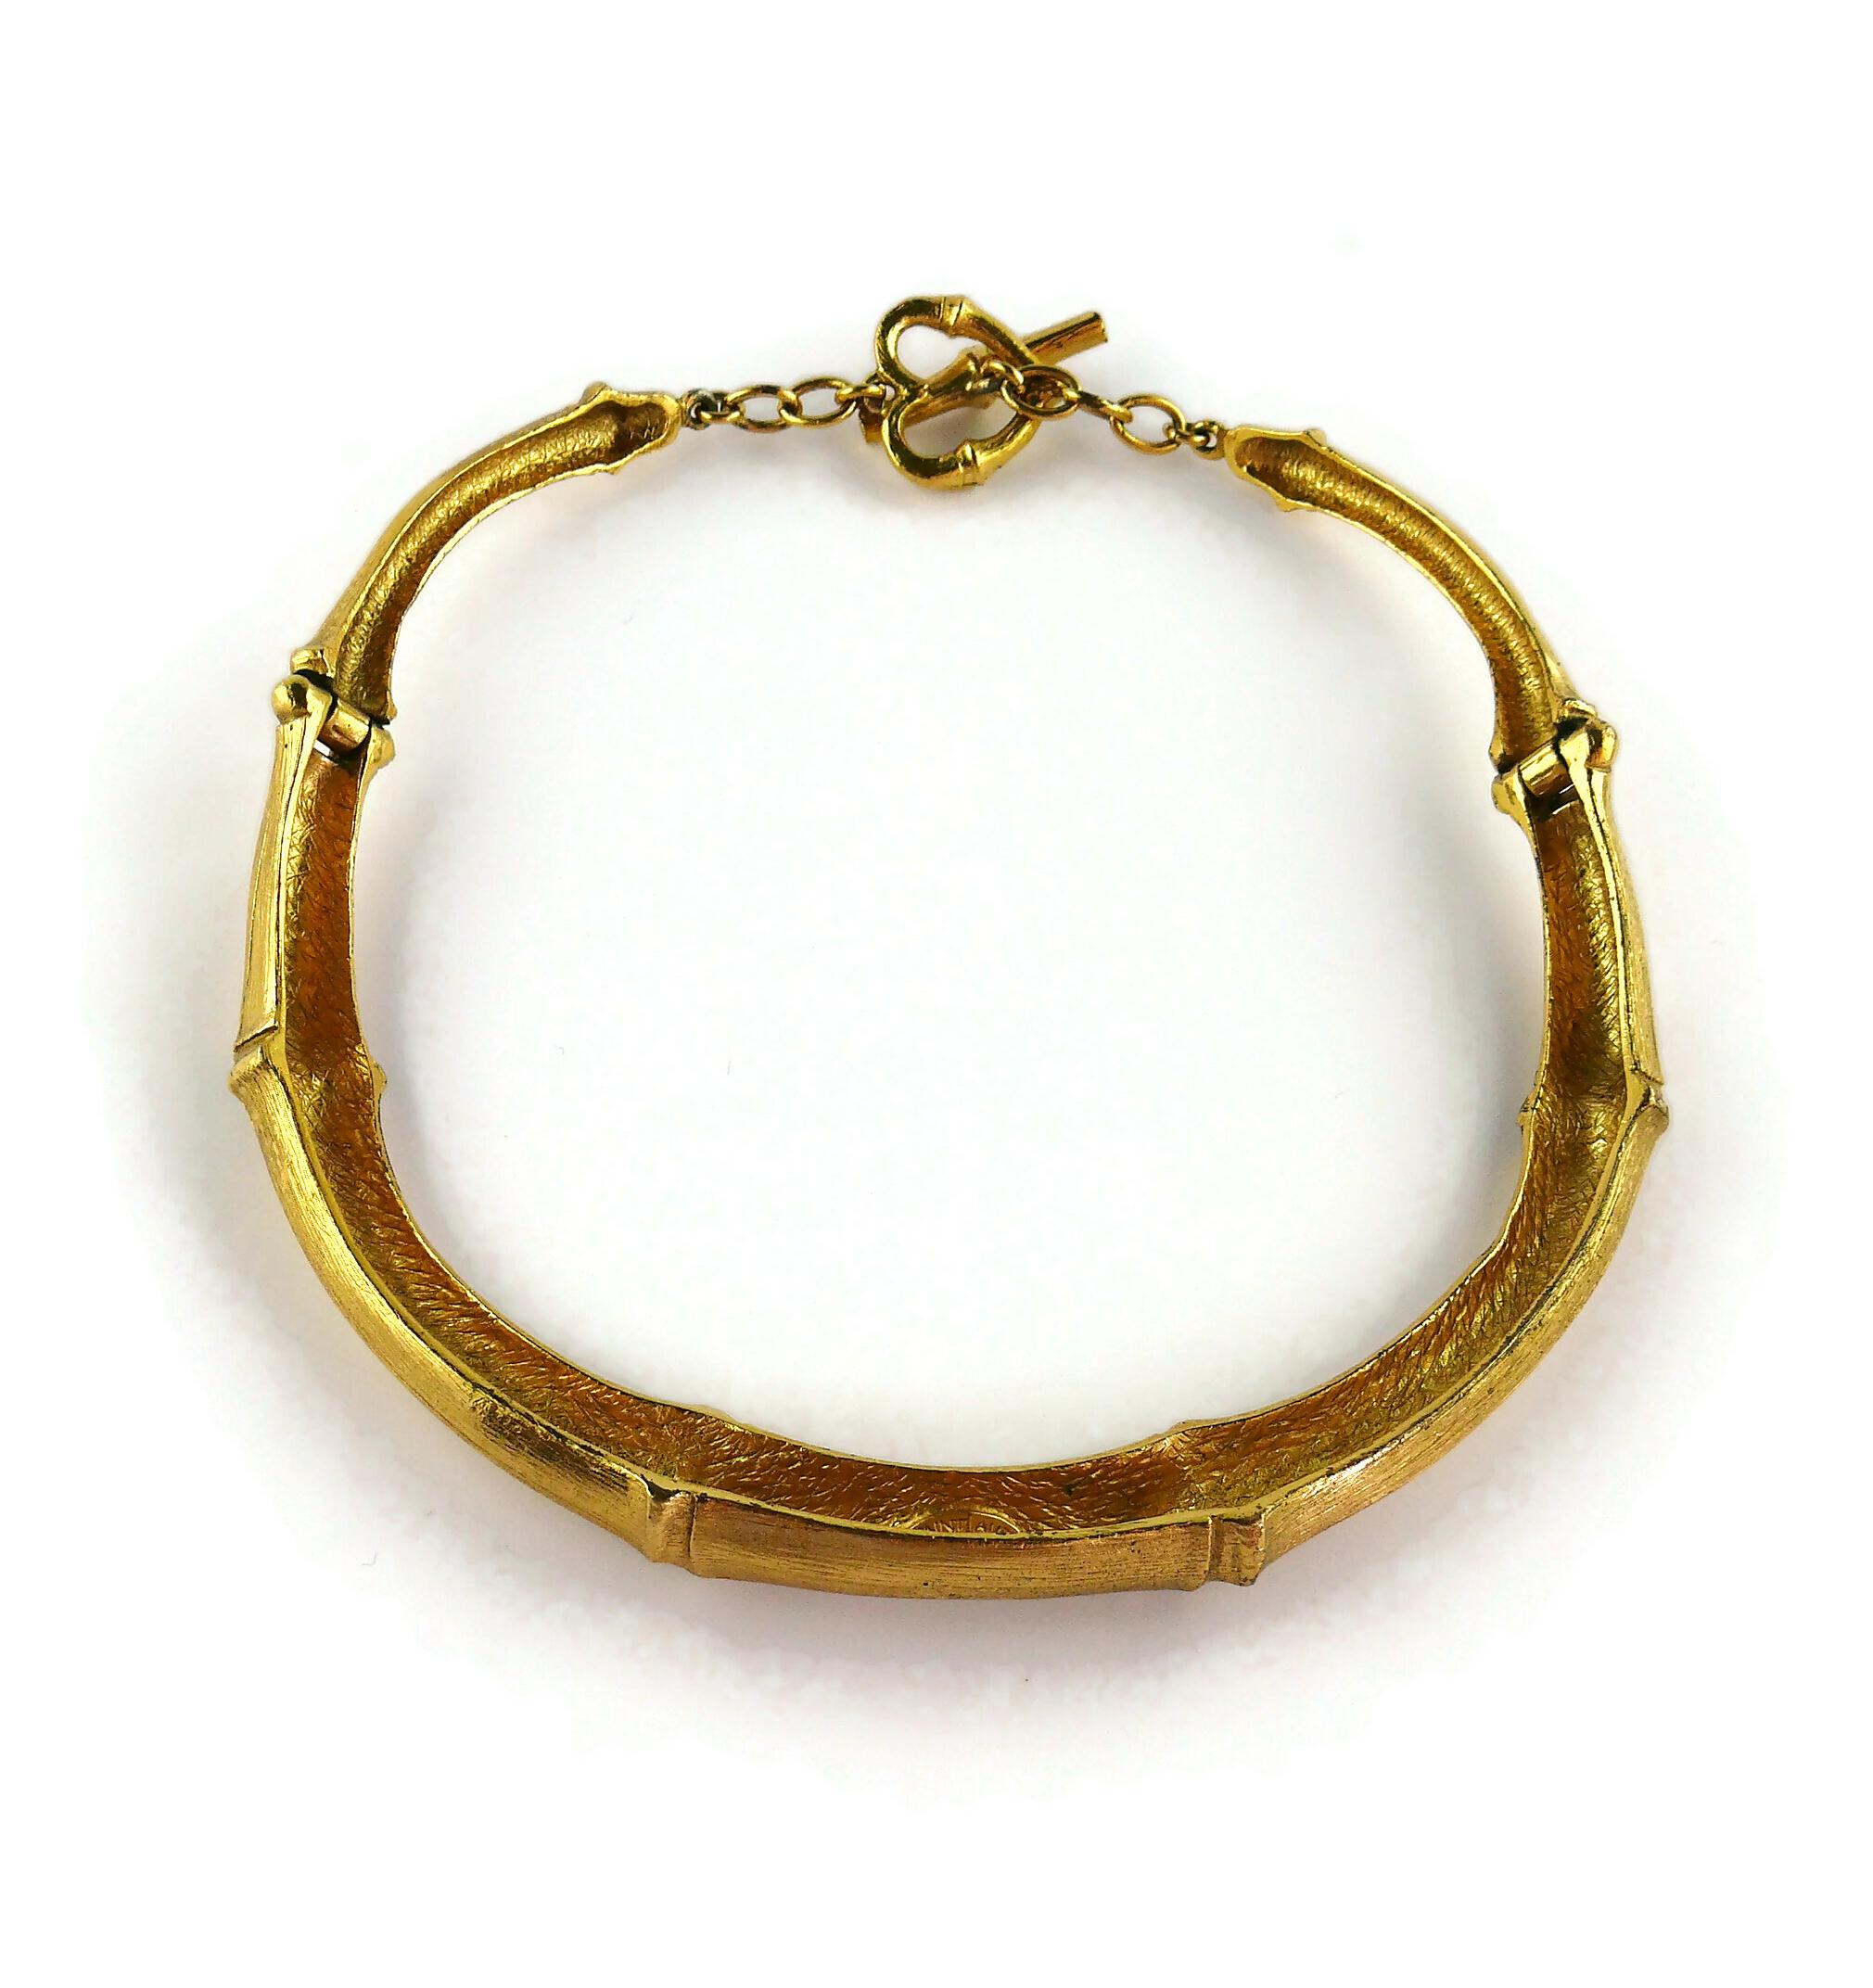 Yves Saint Laurent YSL Vintage Gold Toned Bamboo Design Collar Necklace For Sale 4